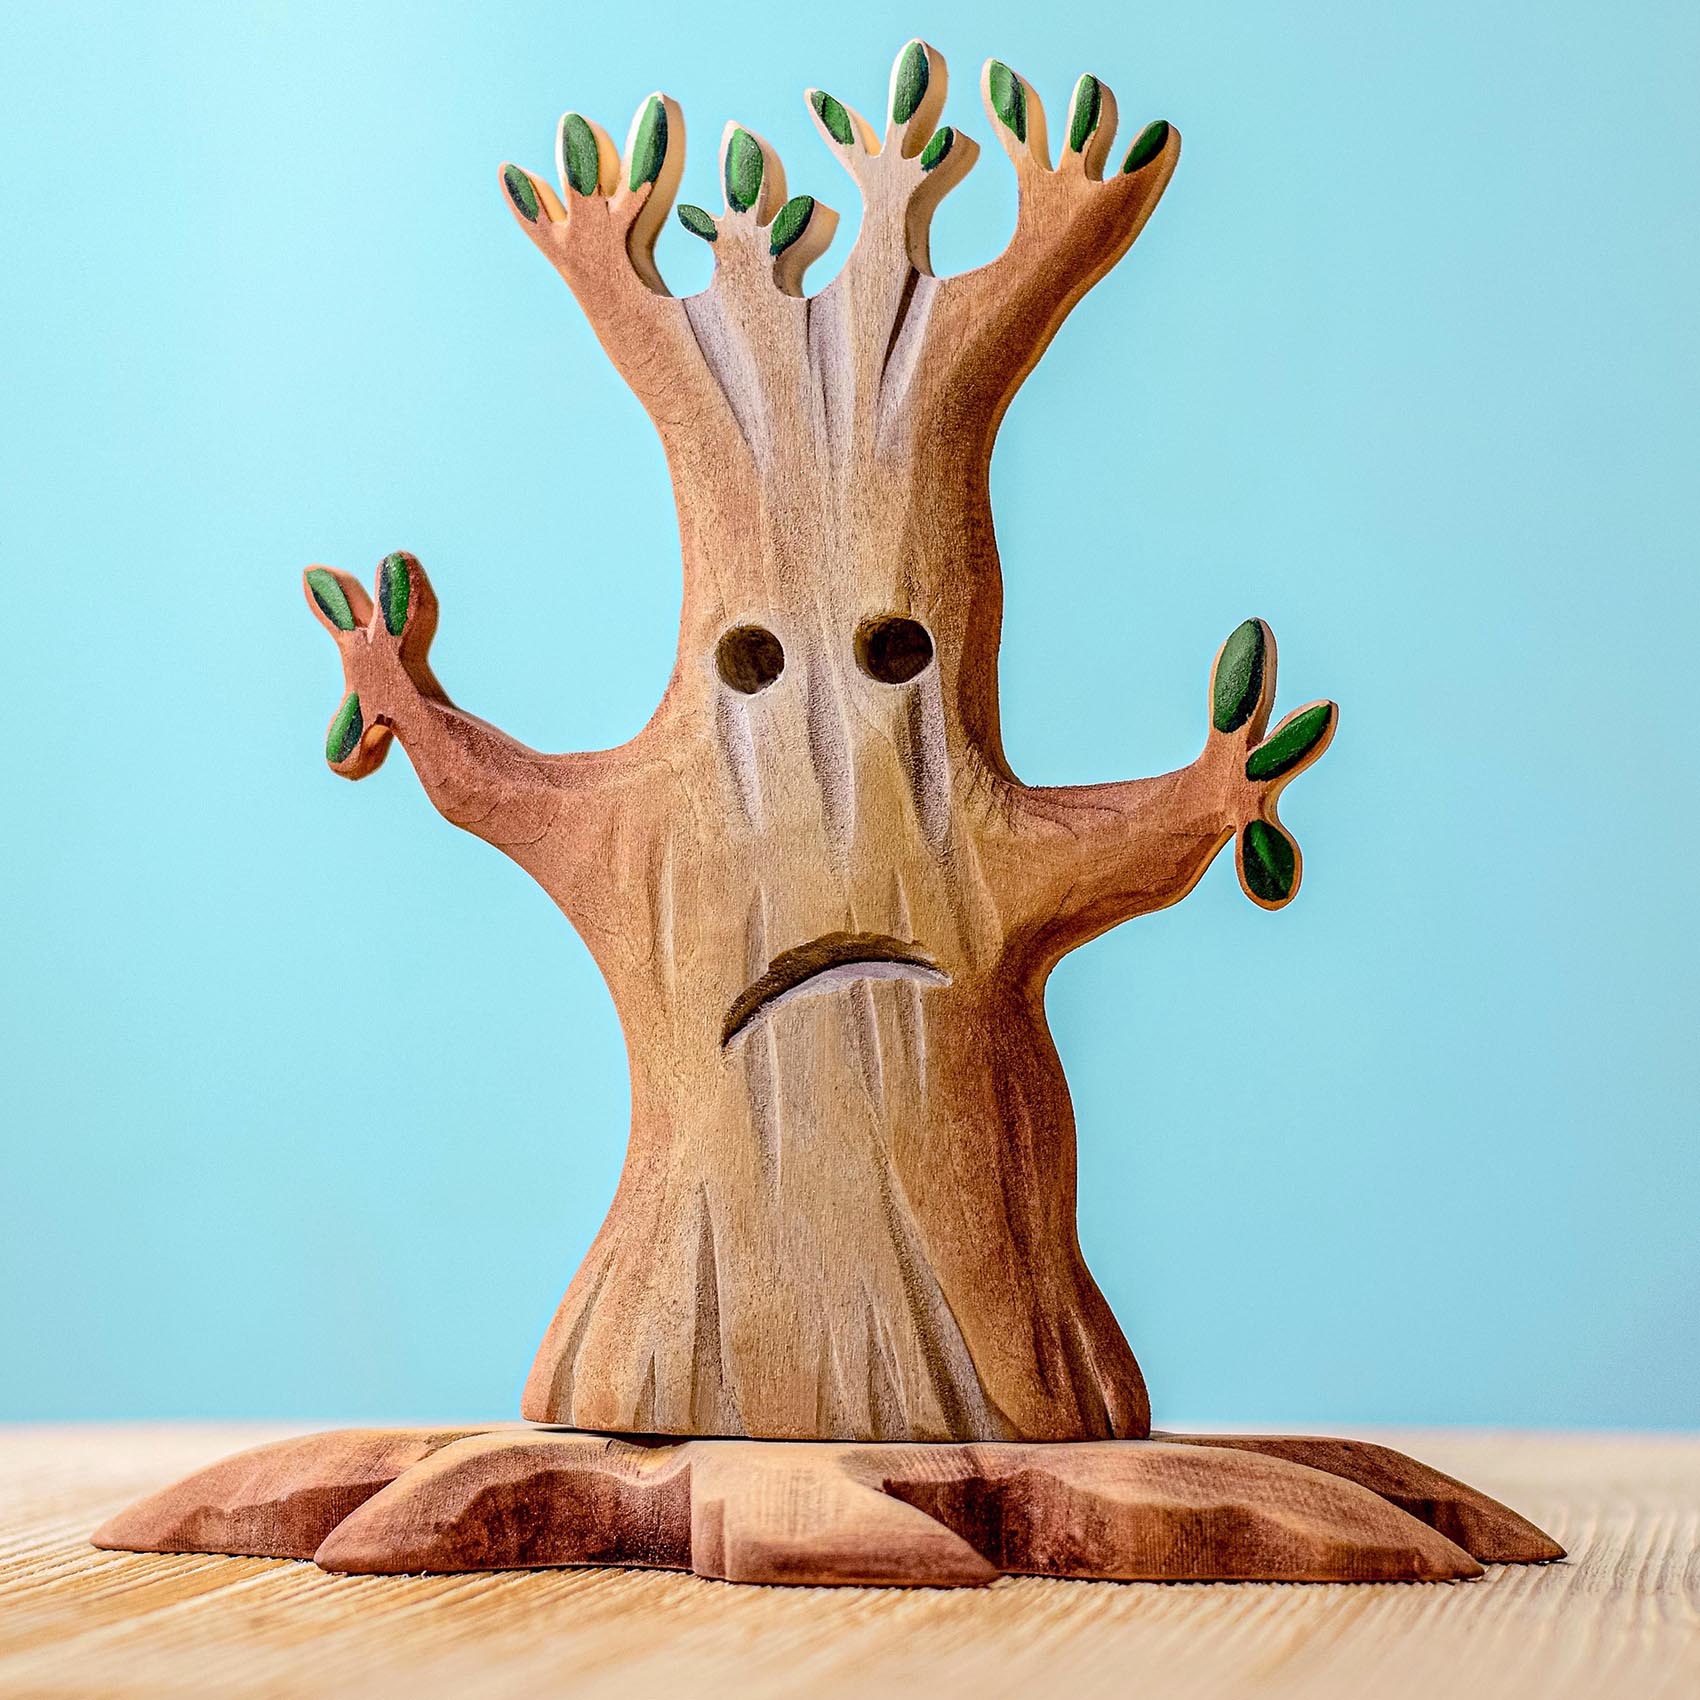 Fat Brain Toys: Hey Clay - Monsters – Growing Tree Toys